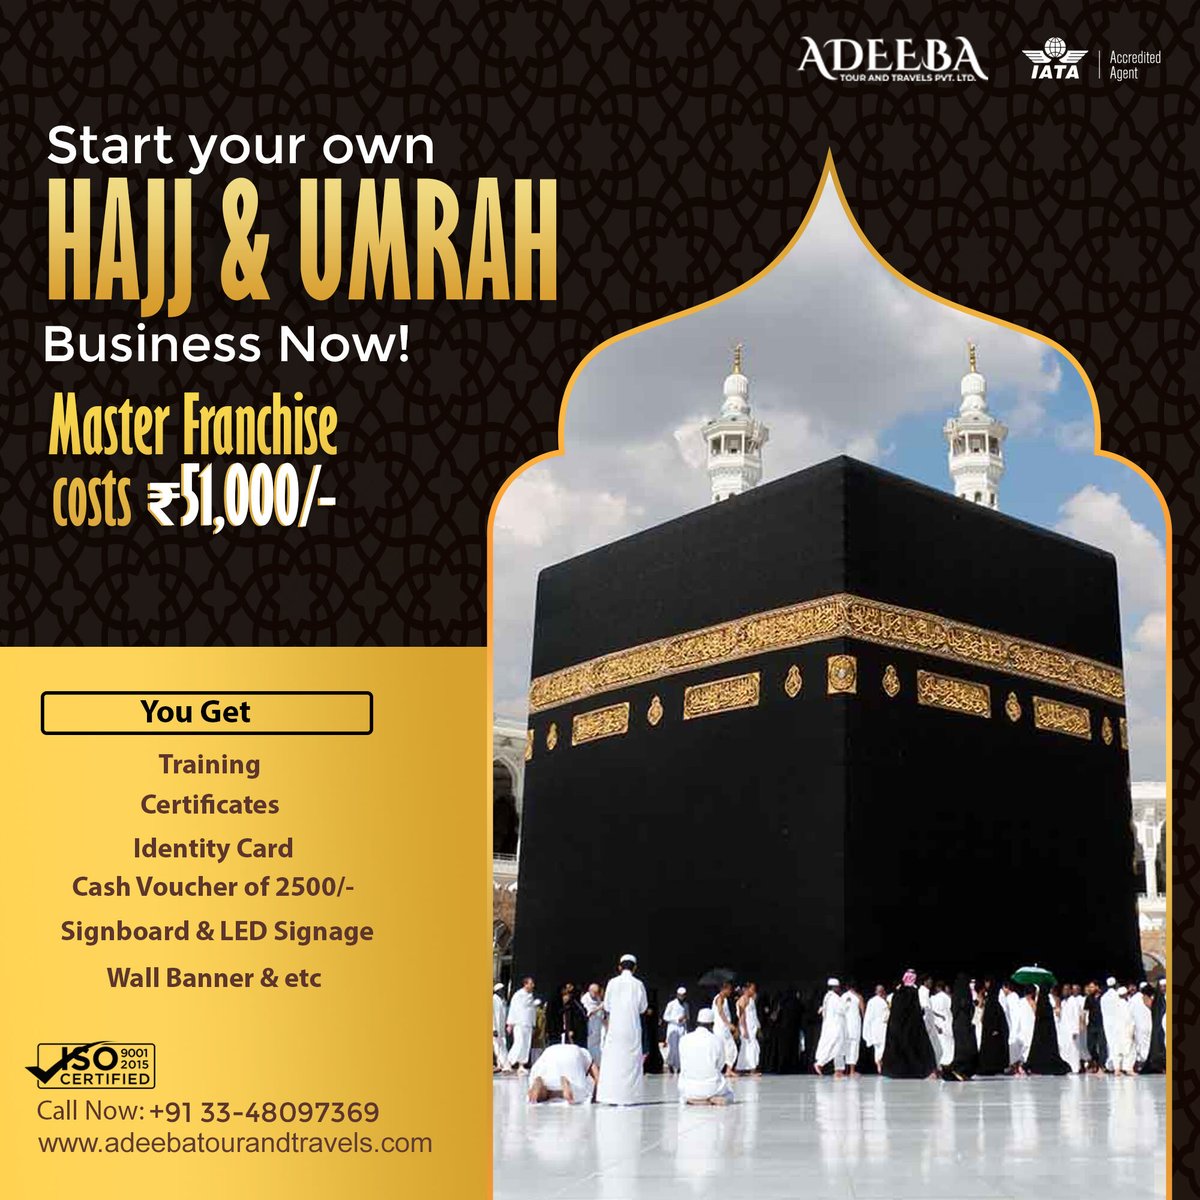 Turn your dream into reality to launch a exclusive Hajj and Umrah startup and reach higher ranks of success.
#business #businessowners #BusinessFranchise #franchise  #franchiseowner #FranchisingBusiness #franchiseindia #hajjumrah  #adeebatourandtravels #masterfranchise